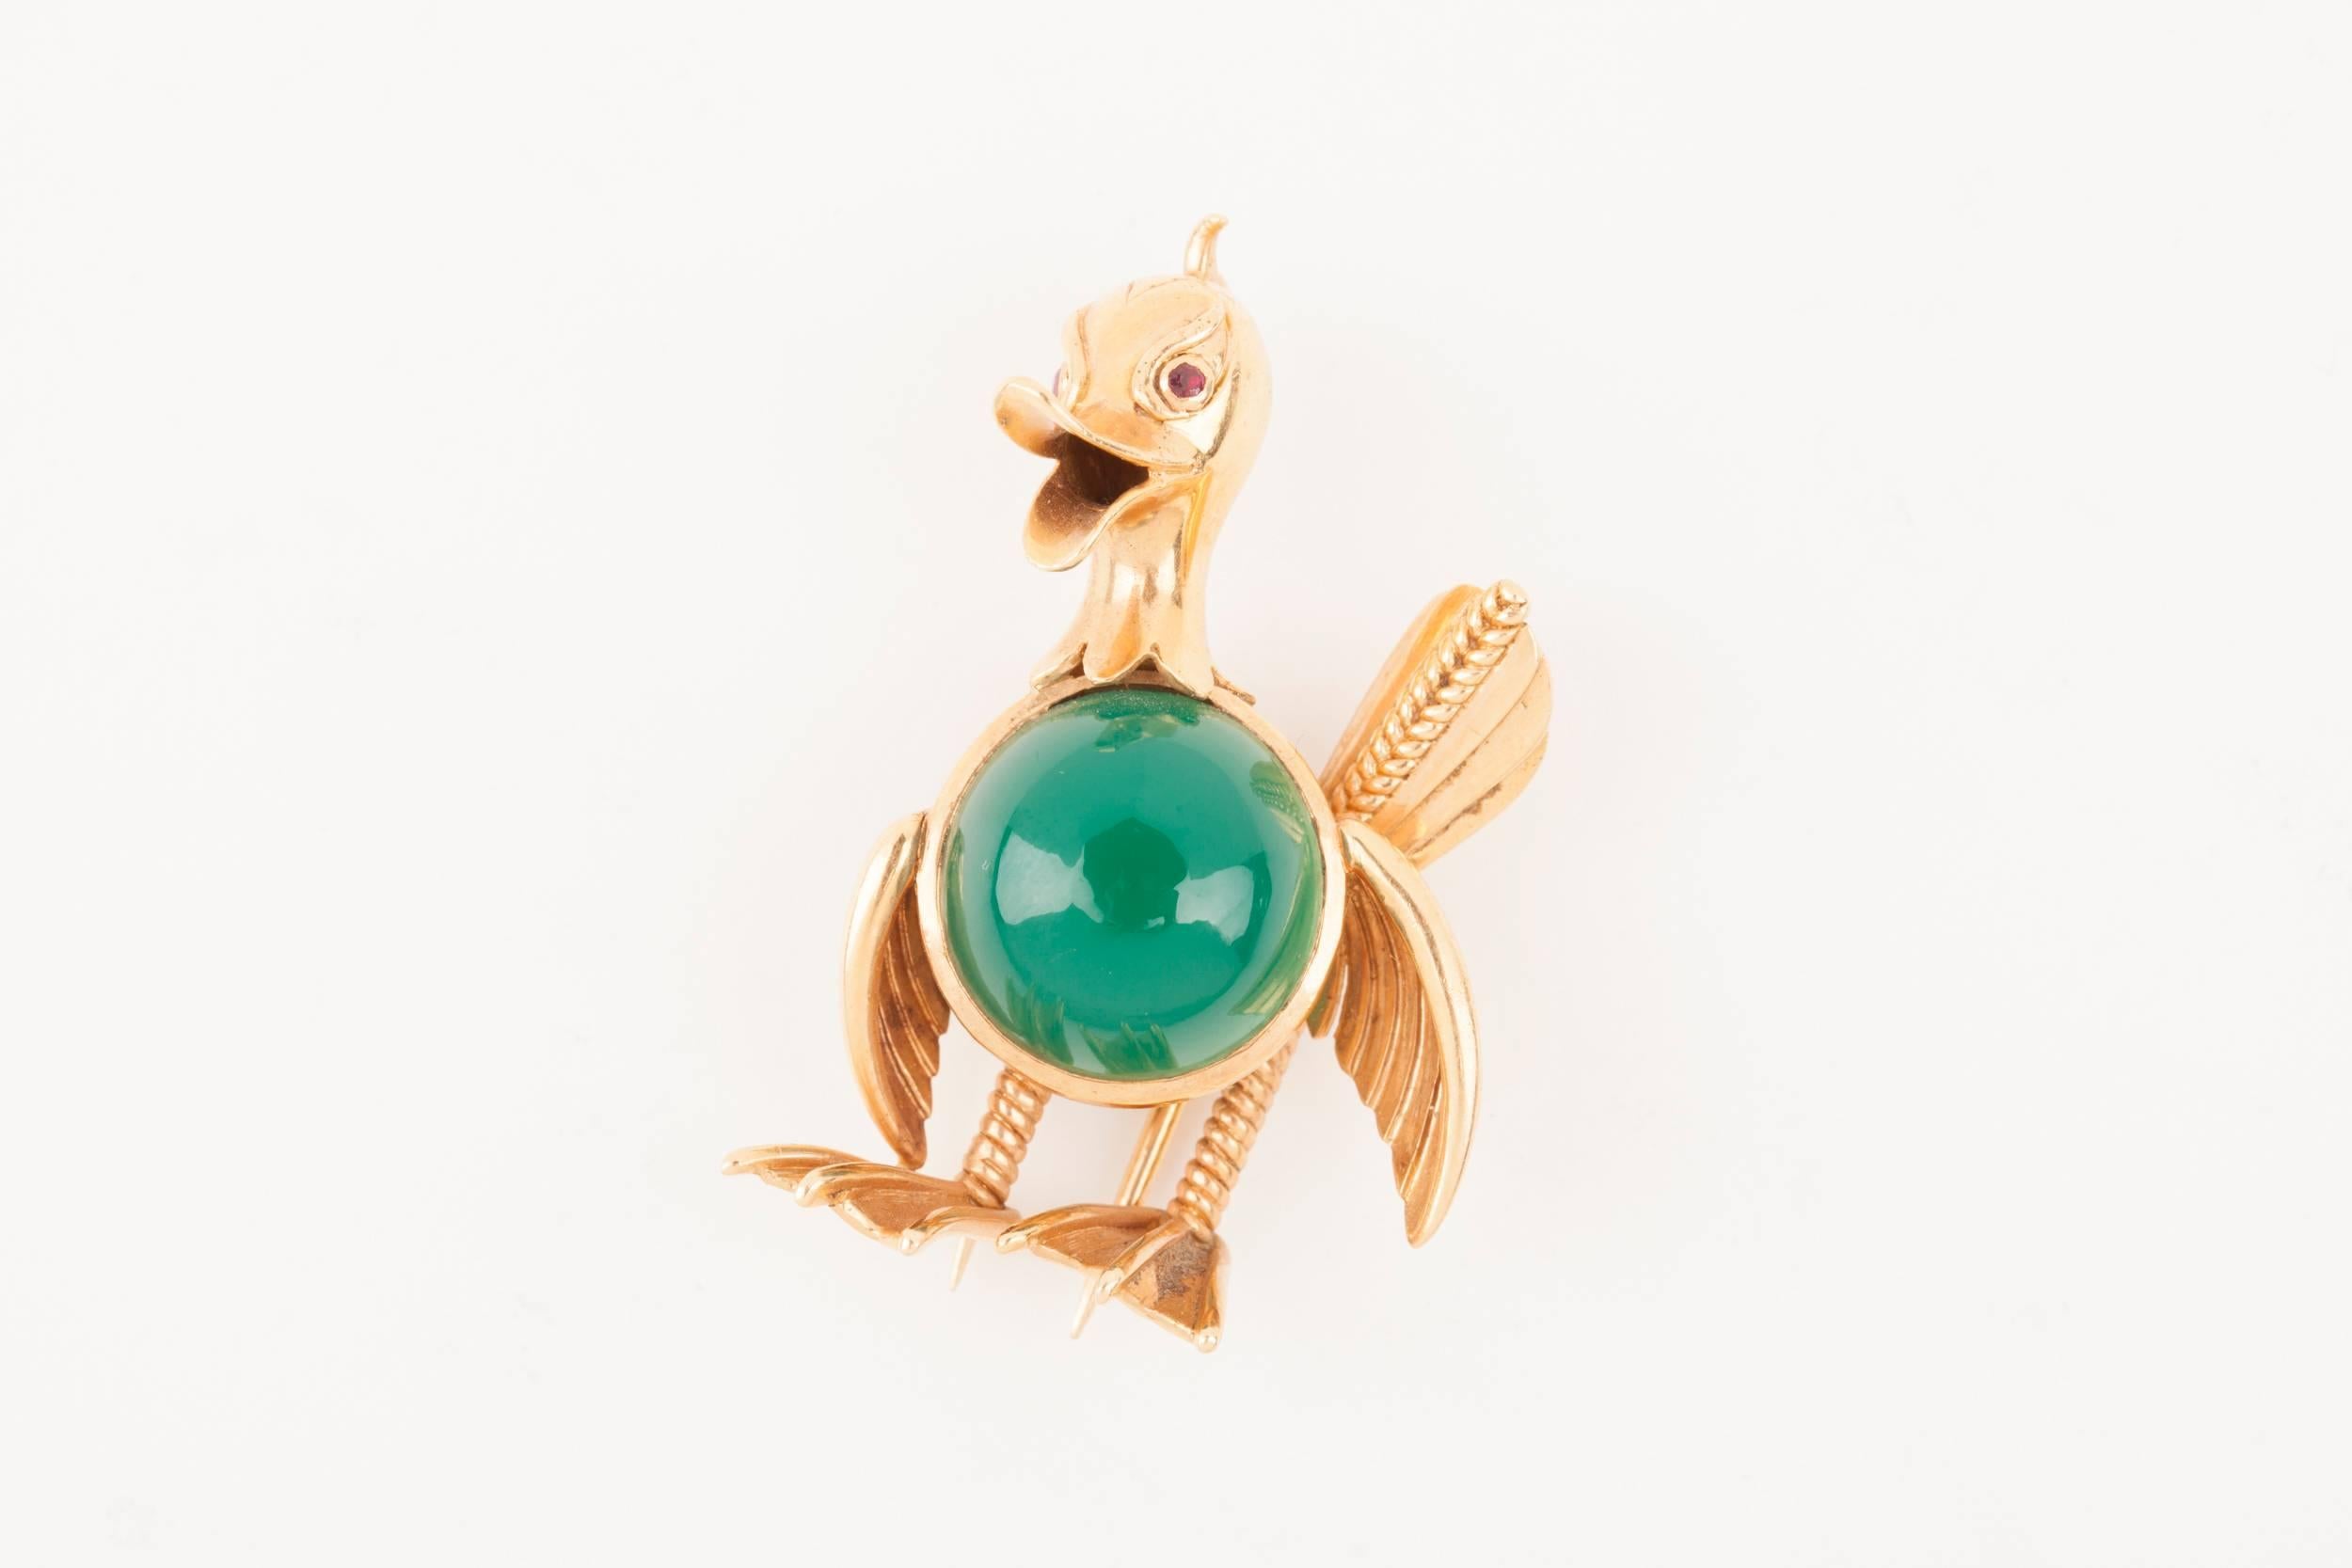 Very nice design brooch, made in France circa 1950. 
The duck is very lovely.
Made with 18k gold(French marks) and one beautiful Agate stone cabochon.
Dimensions: 4.5 * 2.6 cm
Weight: 15.5 grams.
